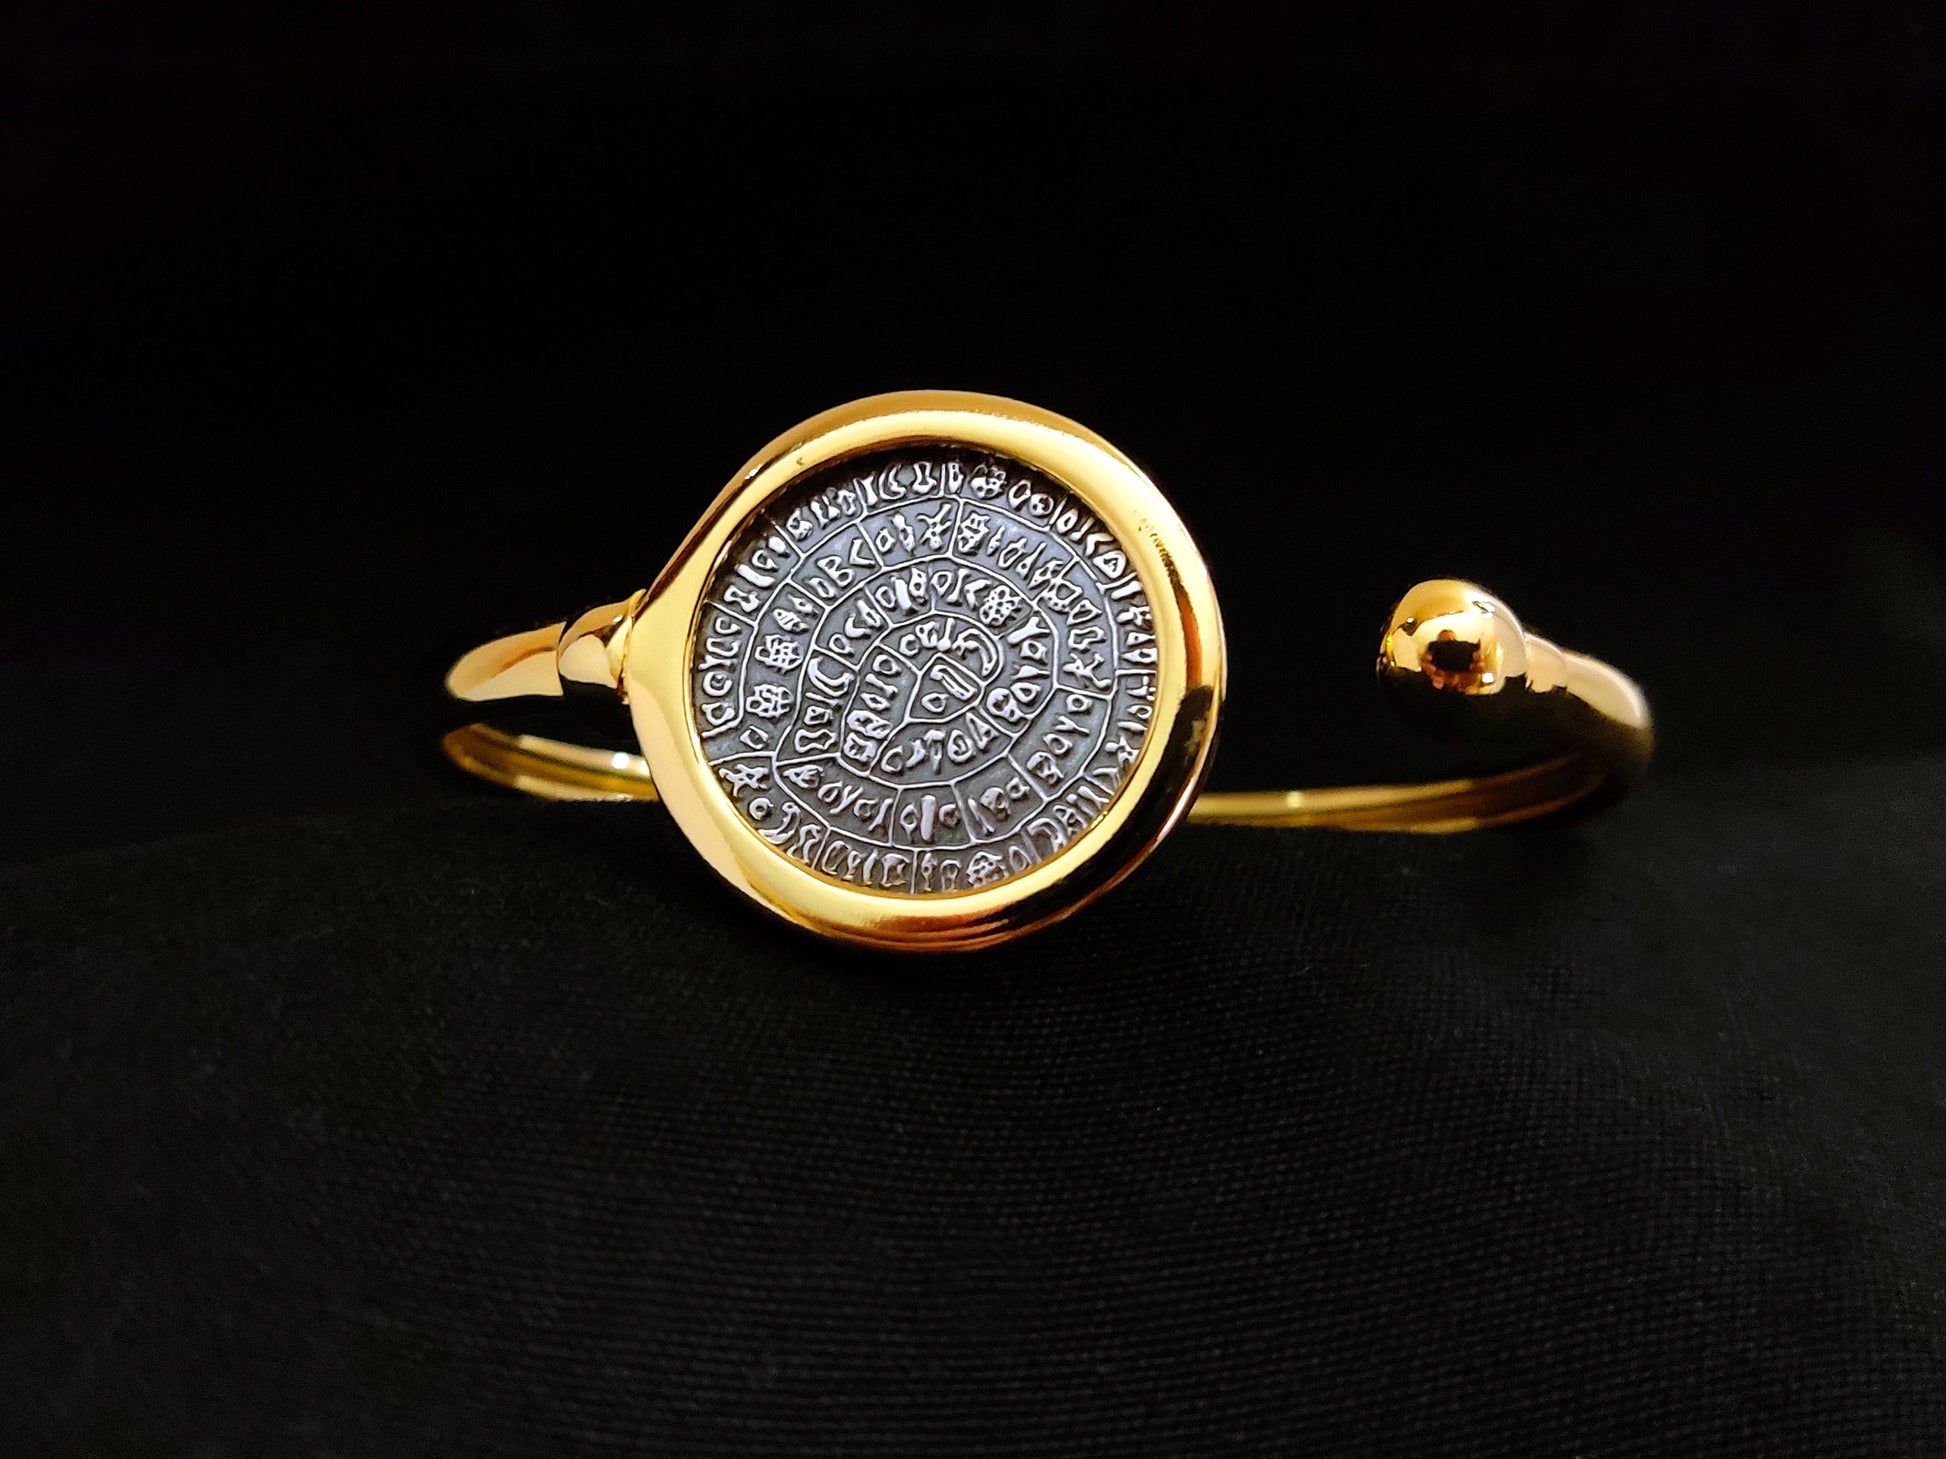 Close-up view of a Phaistos Disc silver Greek cuff bracelet with gold plating finish on black velvet.